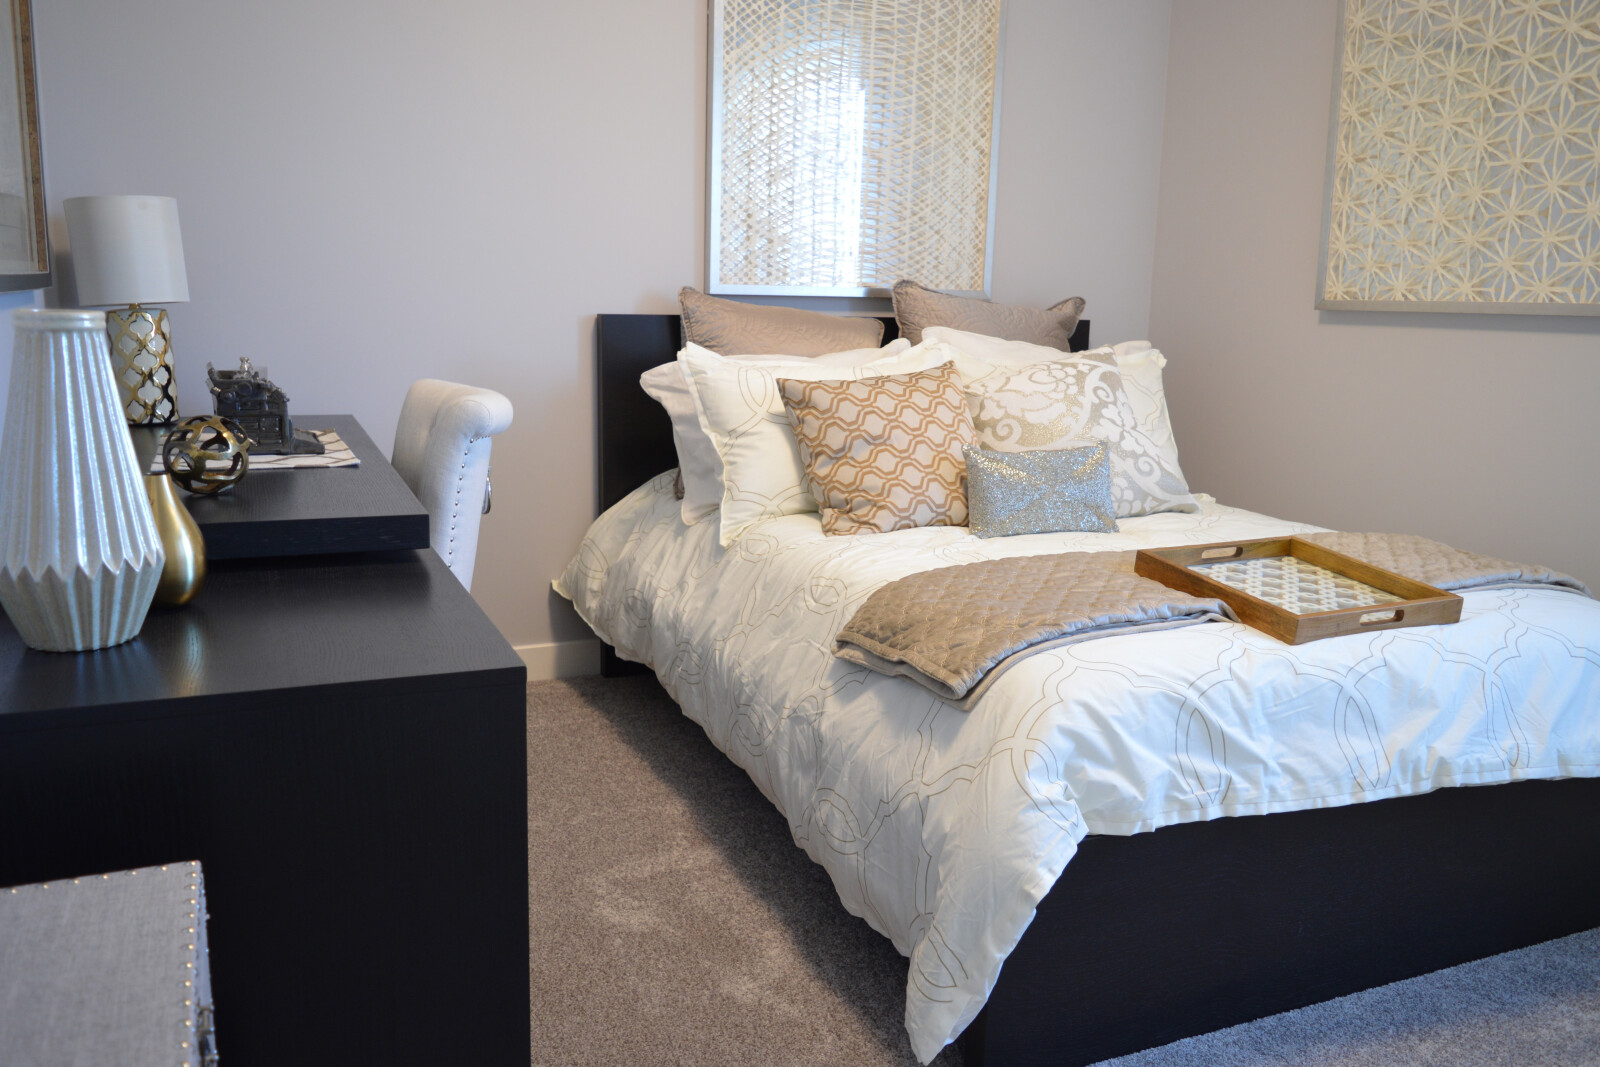 An Overview of How to Design a Comfortable Modern Guest Room